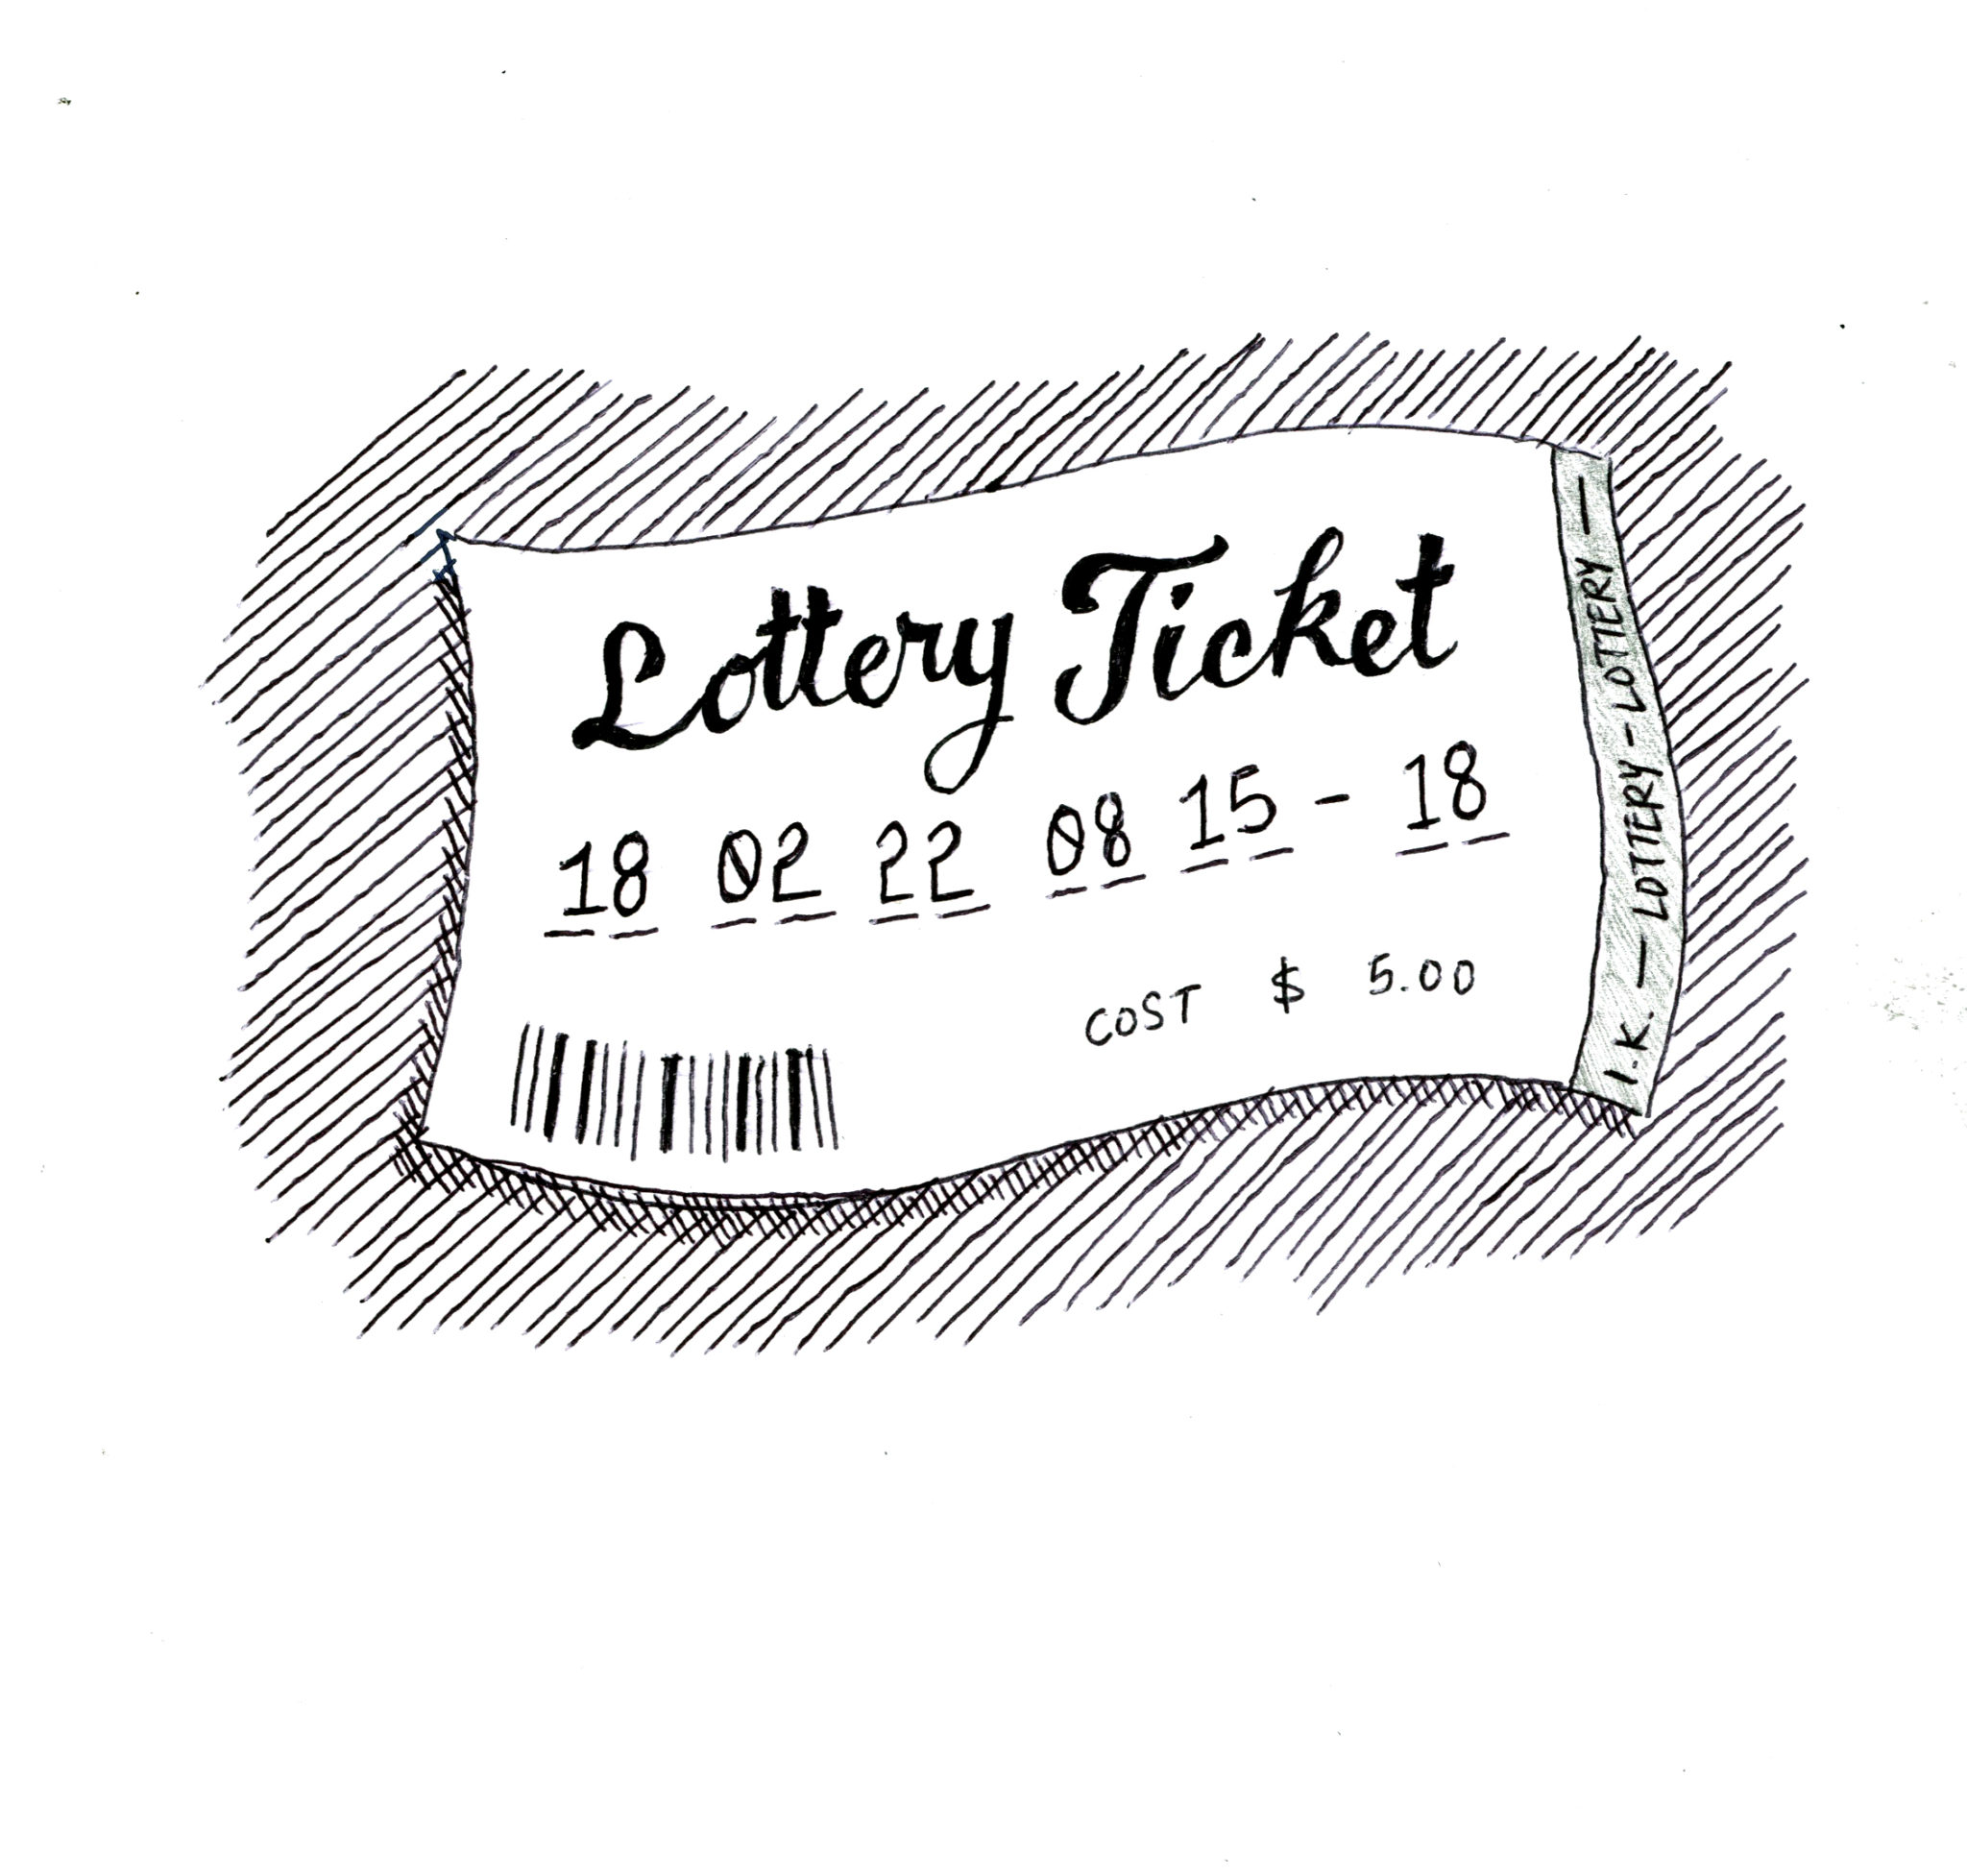 Lottery Tickets - Lottery Ticket Drawing. 